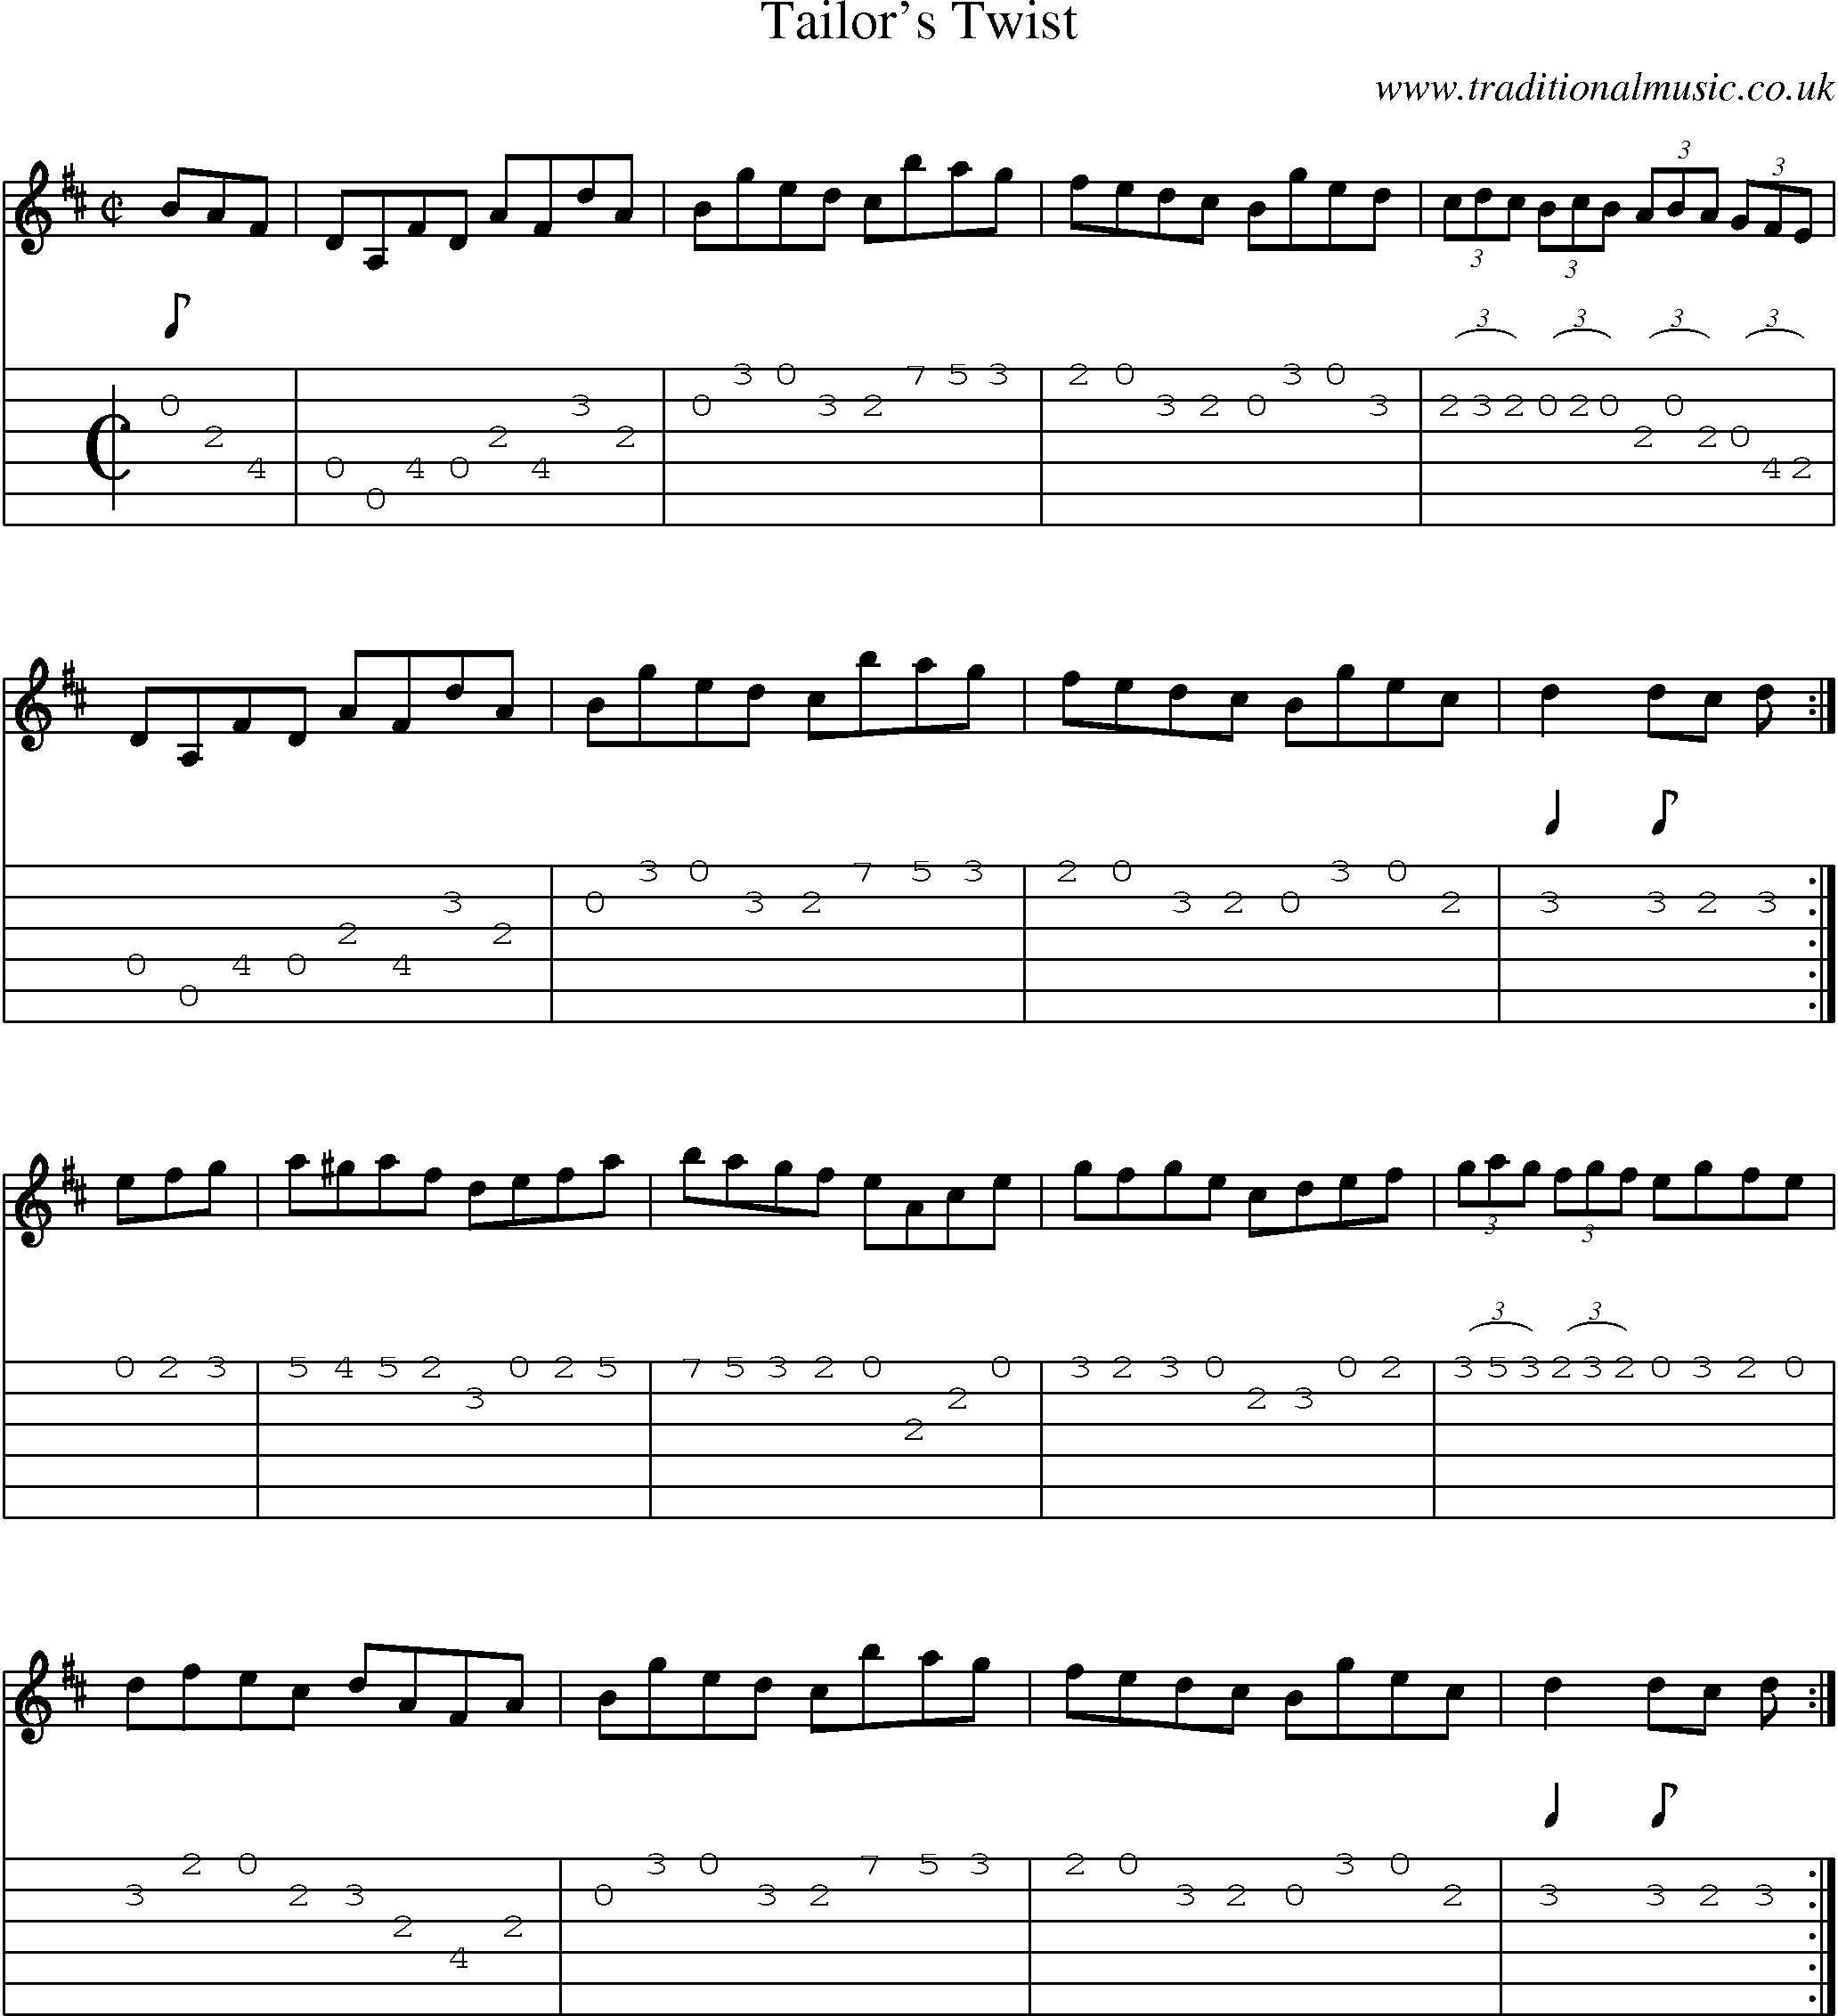 Music Score and Guitar Tabs for Tailors Twist